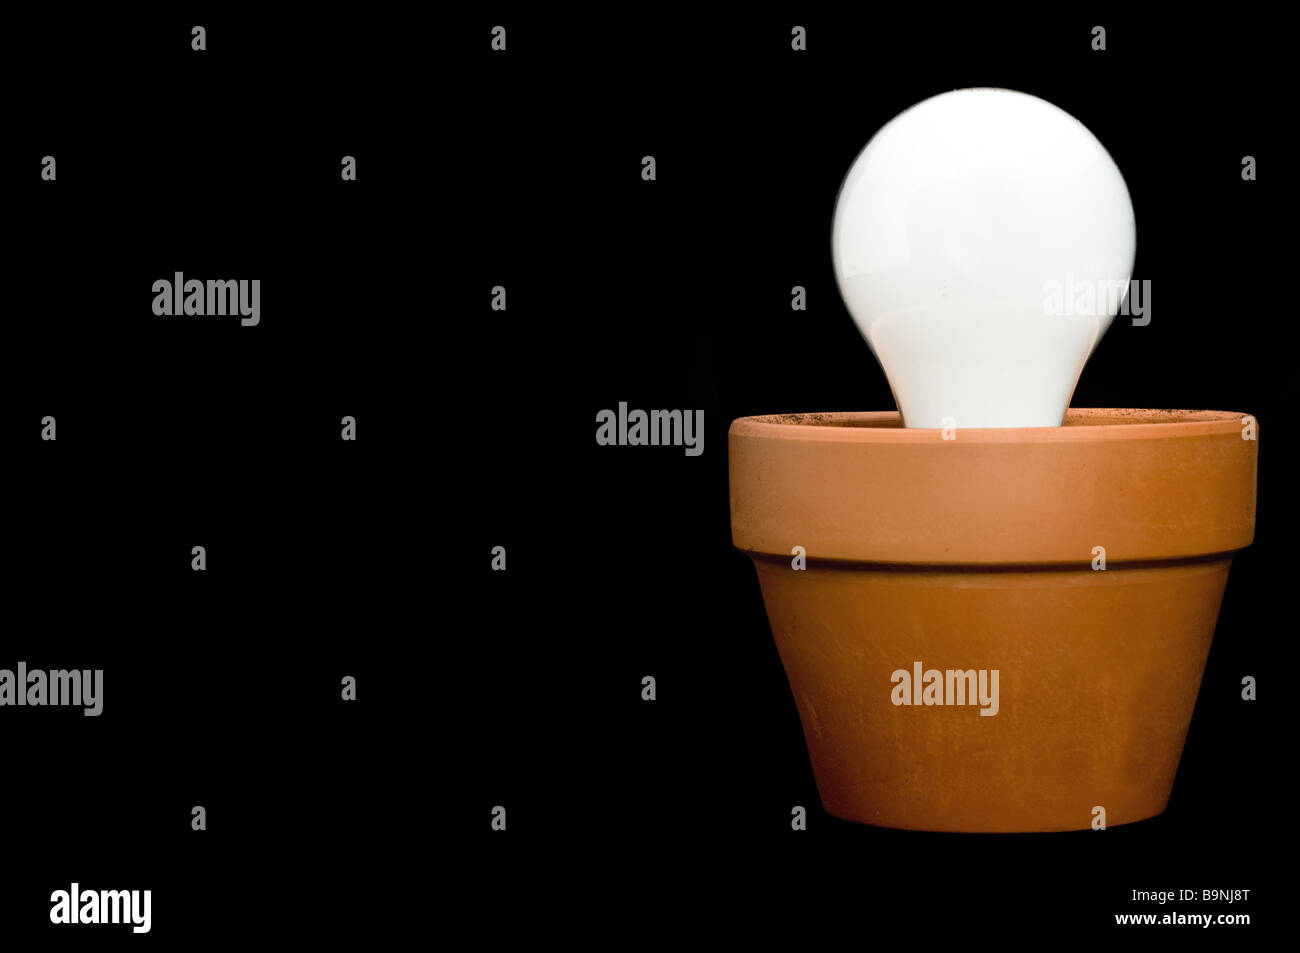 Glowing incandescant bulb in a planter with space for copy on the black background Stock Photo